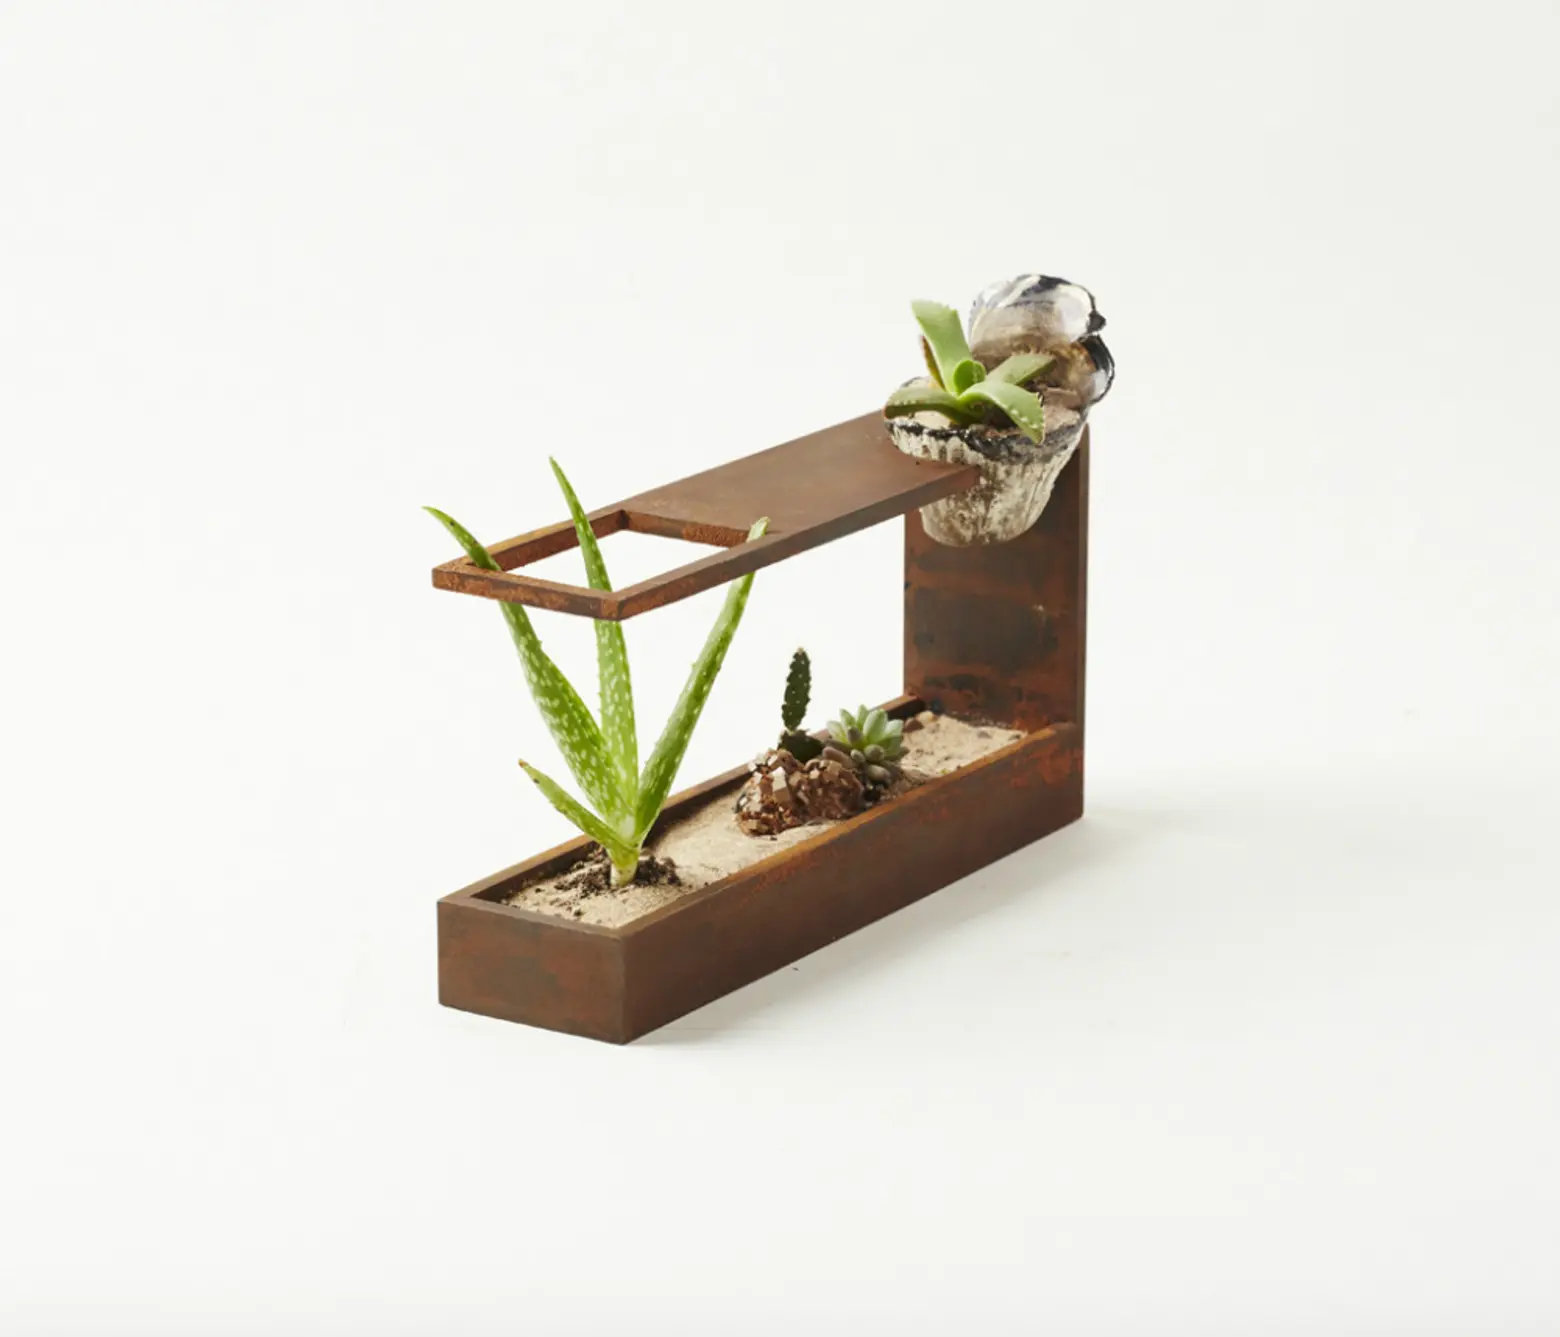 Mini Terrarium designed by Plant-in City's Huy Bui for Home Made